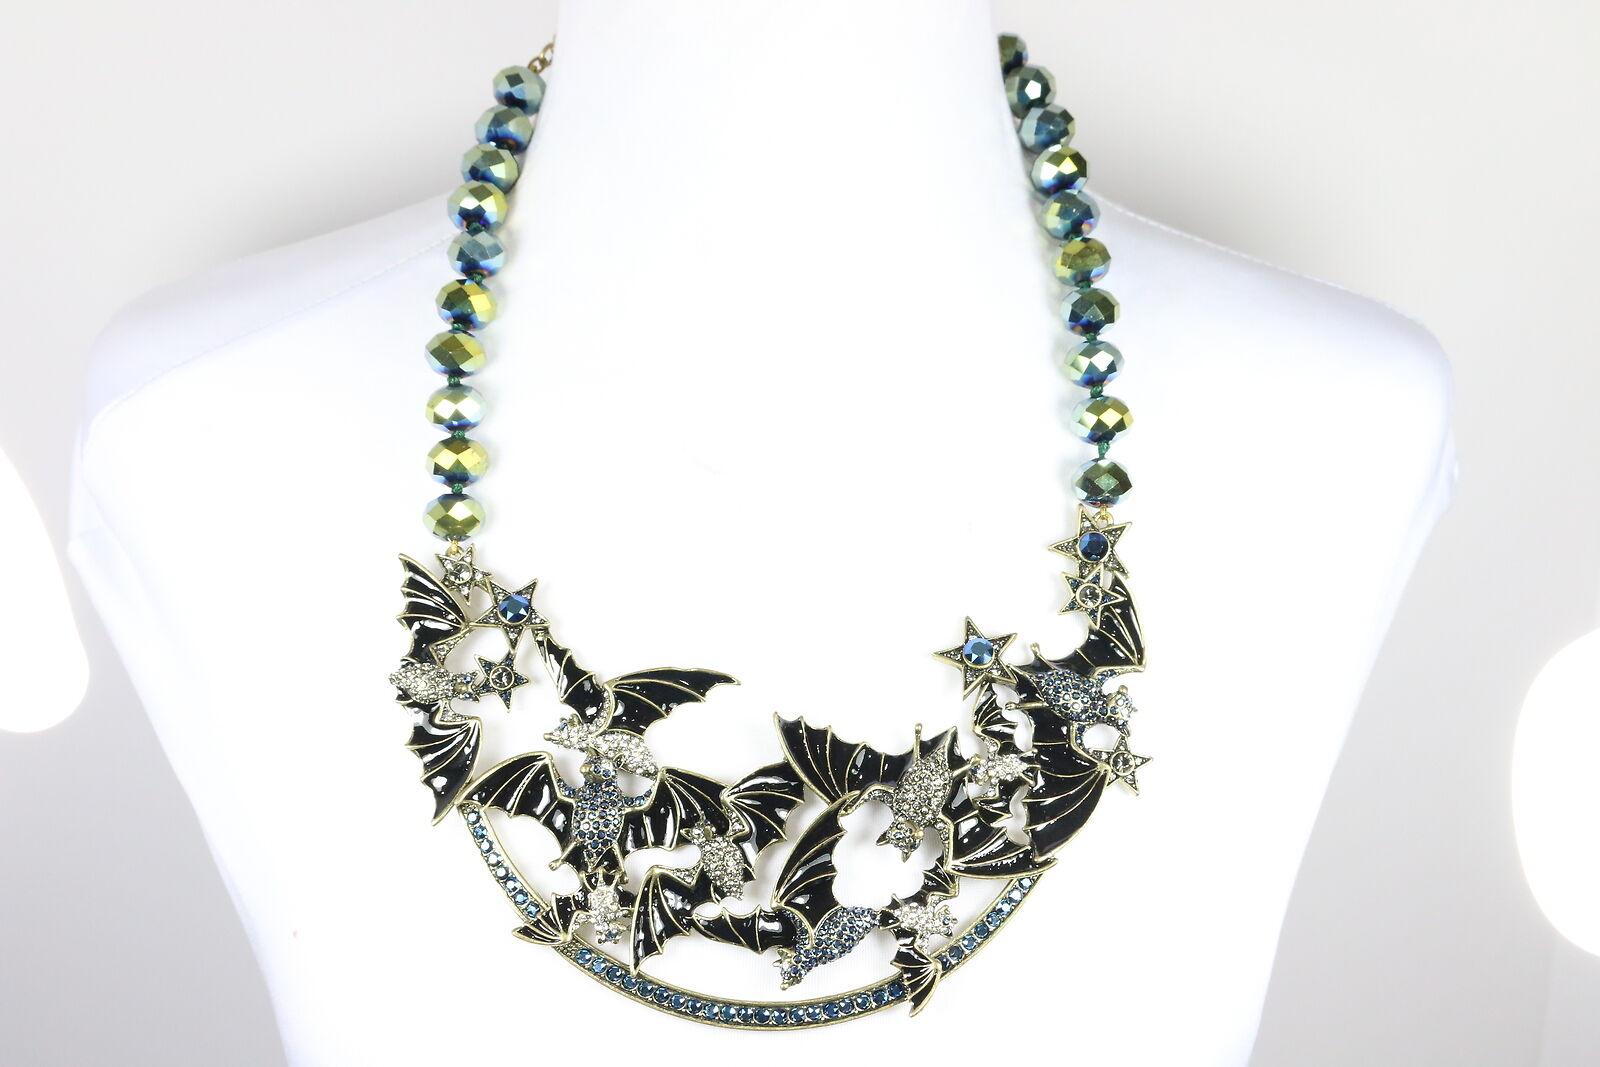 Gothic Revival Heidi Daus Brand New Going Batty Crystal Accented Beaded Bat Necklace For Sale